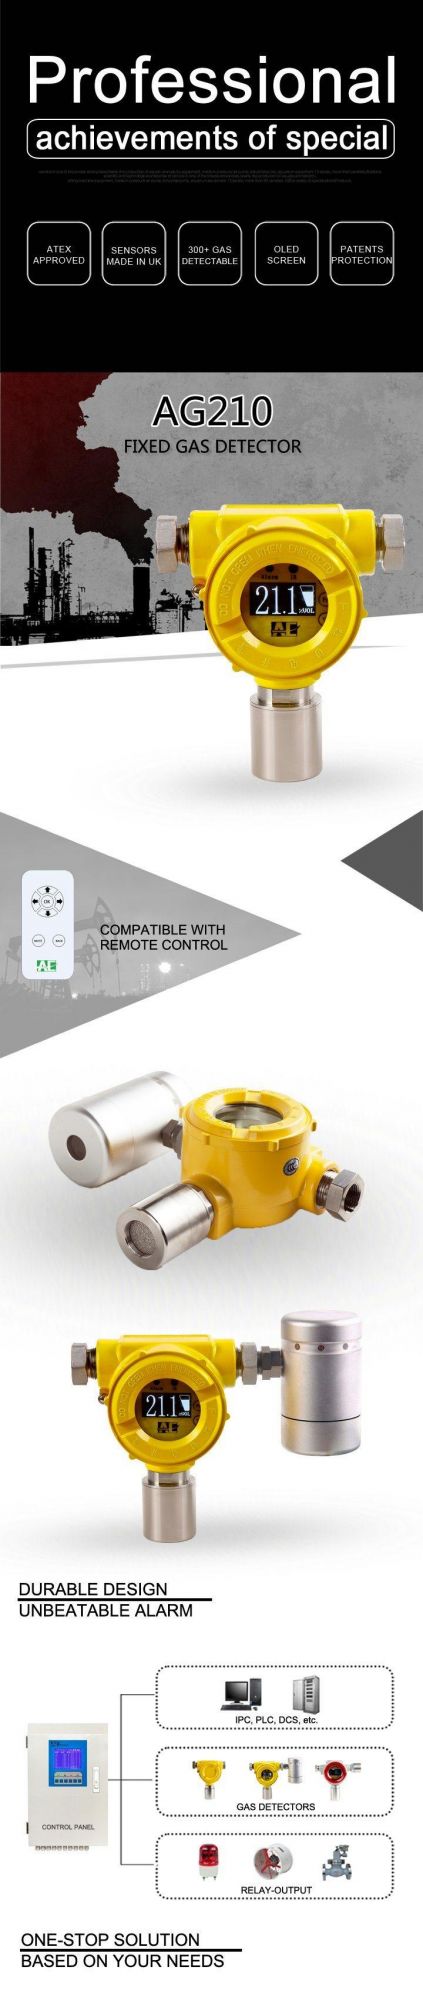 Classic Fixed Gas Leakage Detection System for Monitoring H2 0-100%Lel with Remote Control